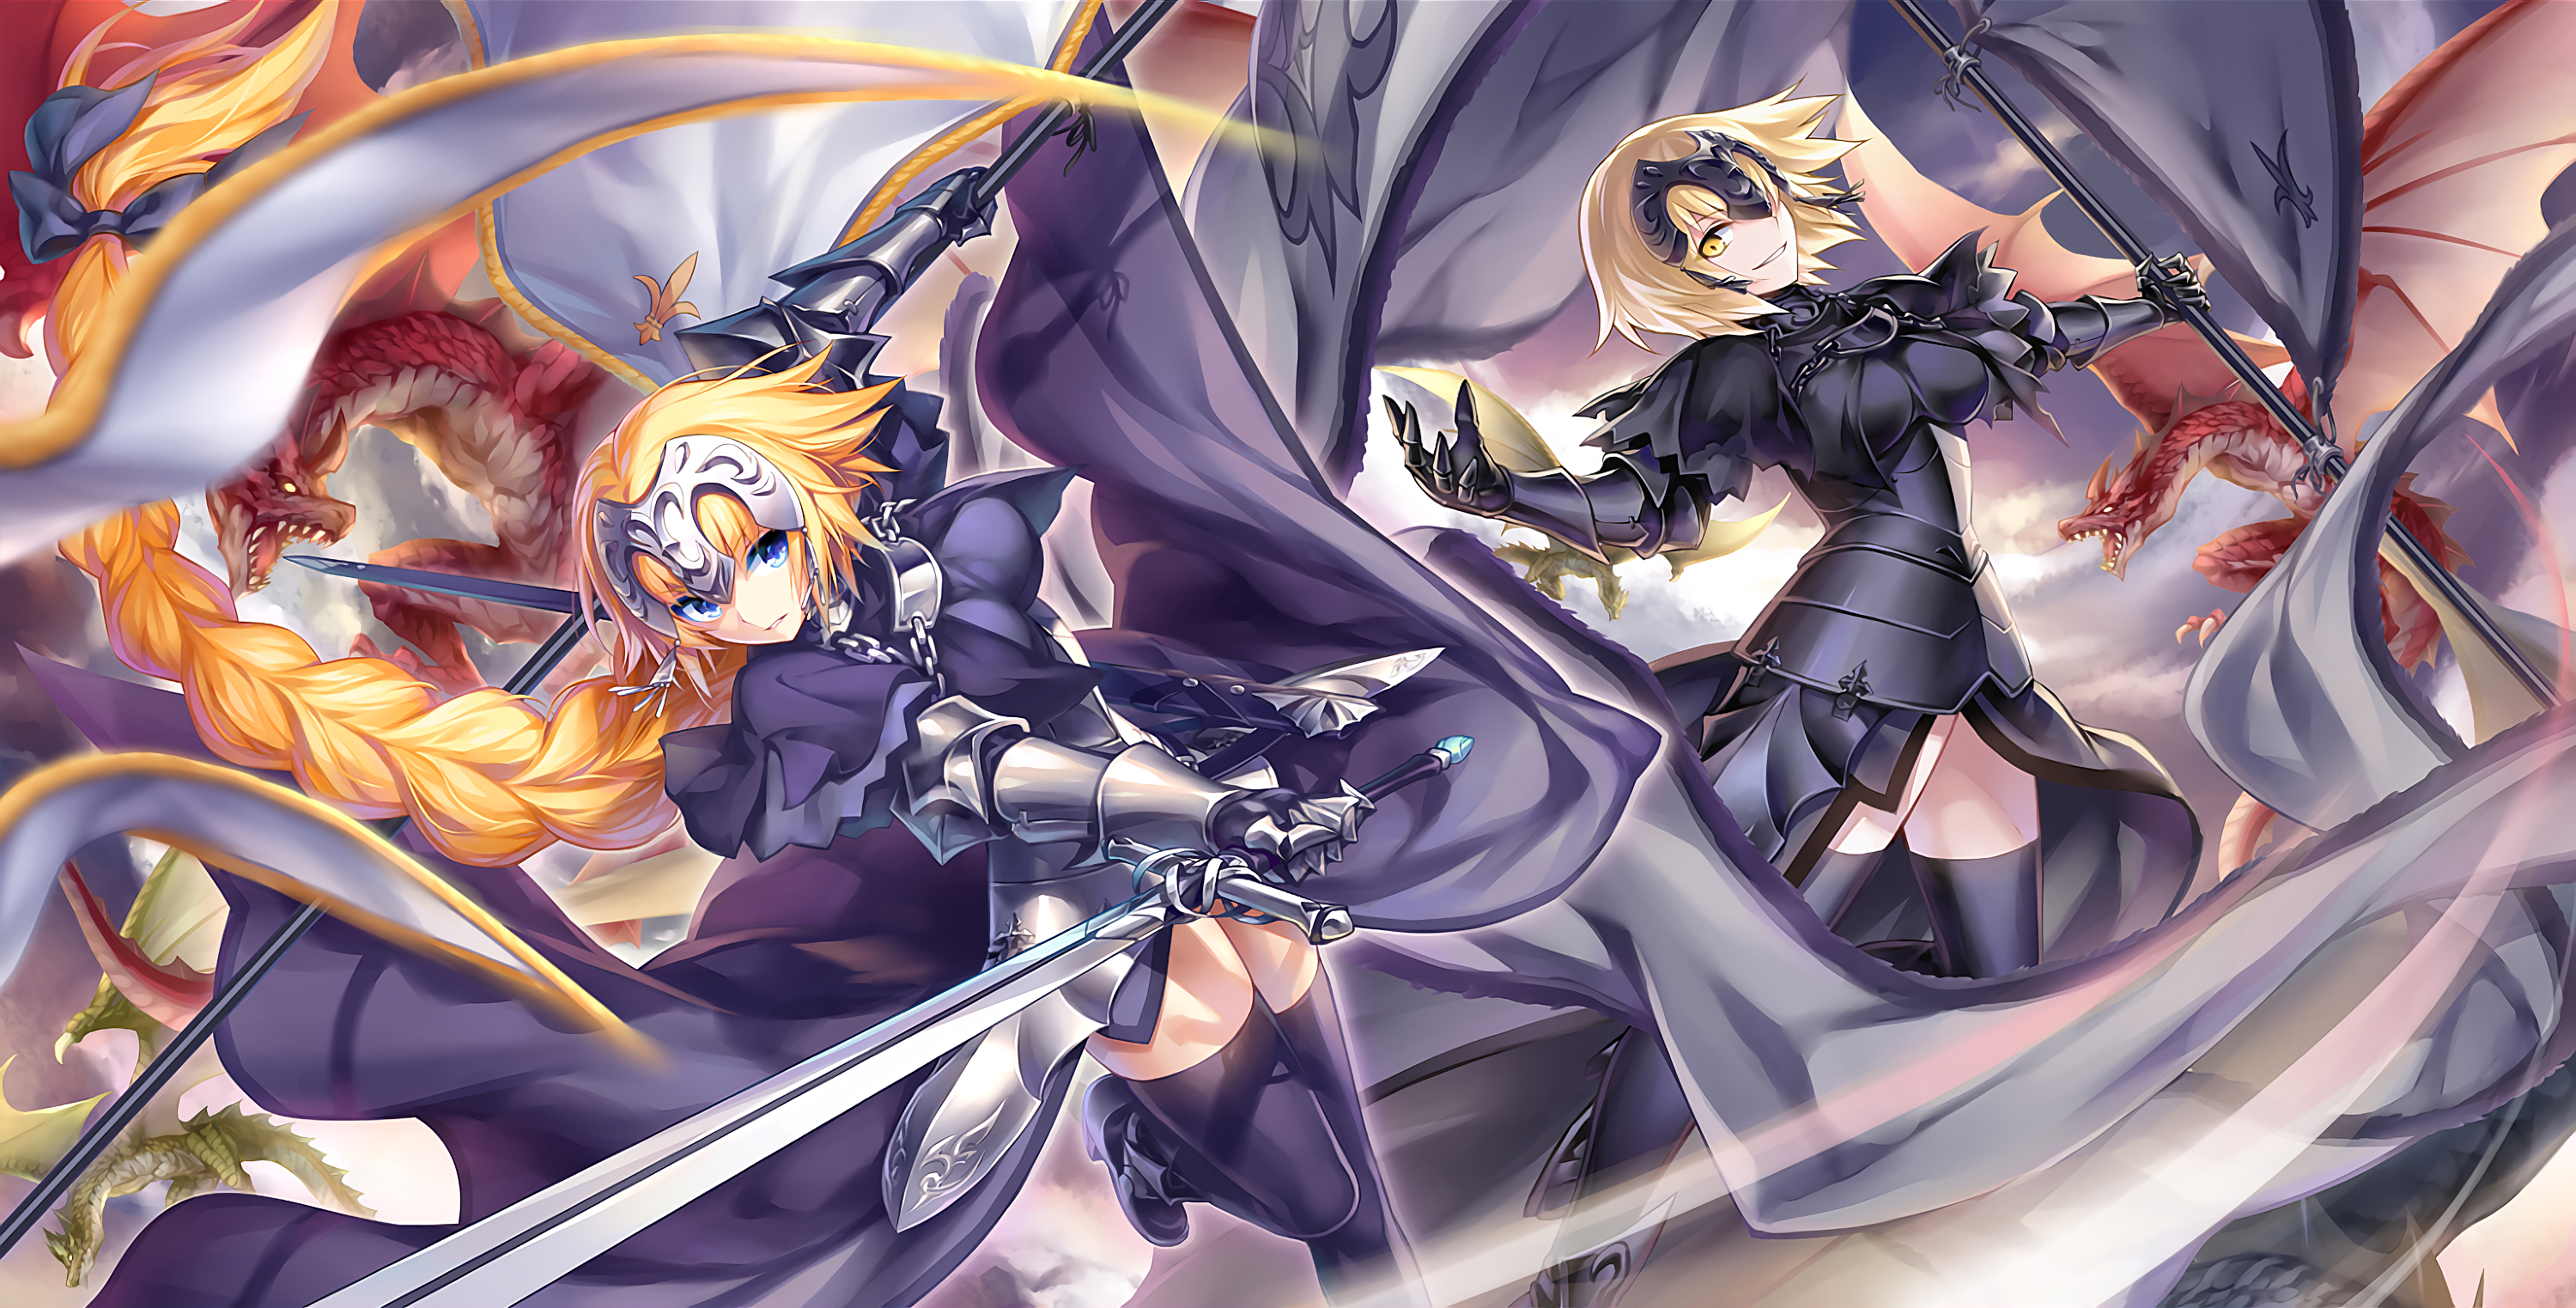 Ruler Jeanne D'arc Fate/stay Fate/grand Order Alter - Jeanne Alter Fate Grand Order 1080p , HD Wallpaper & Backgrounds